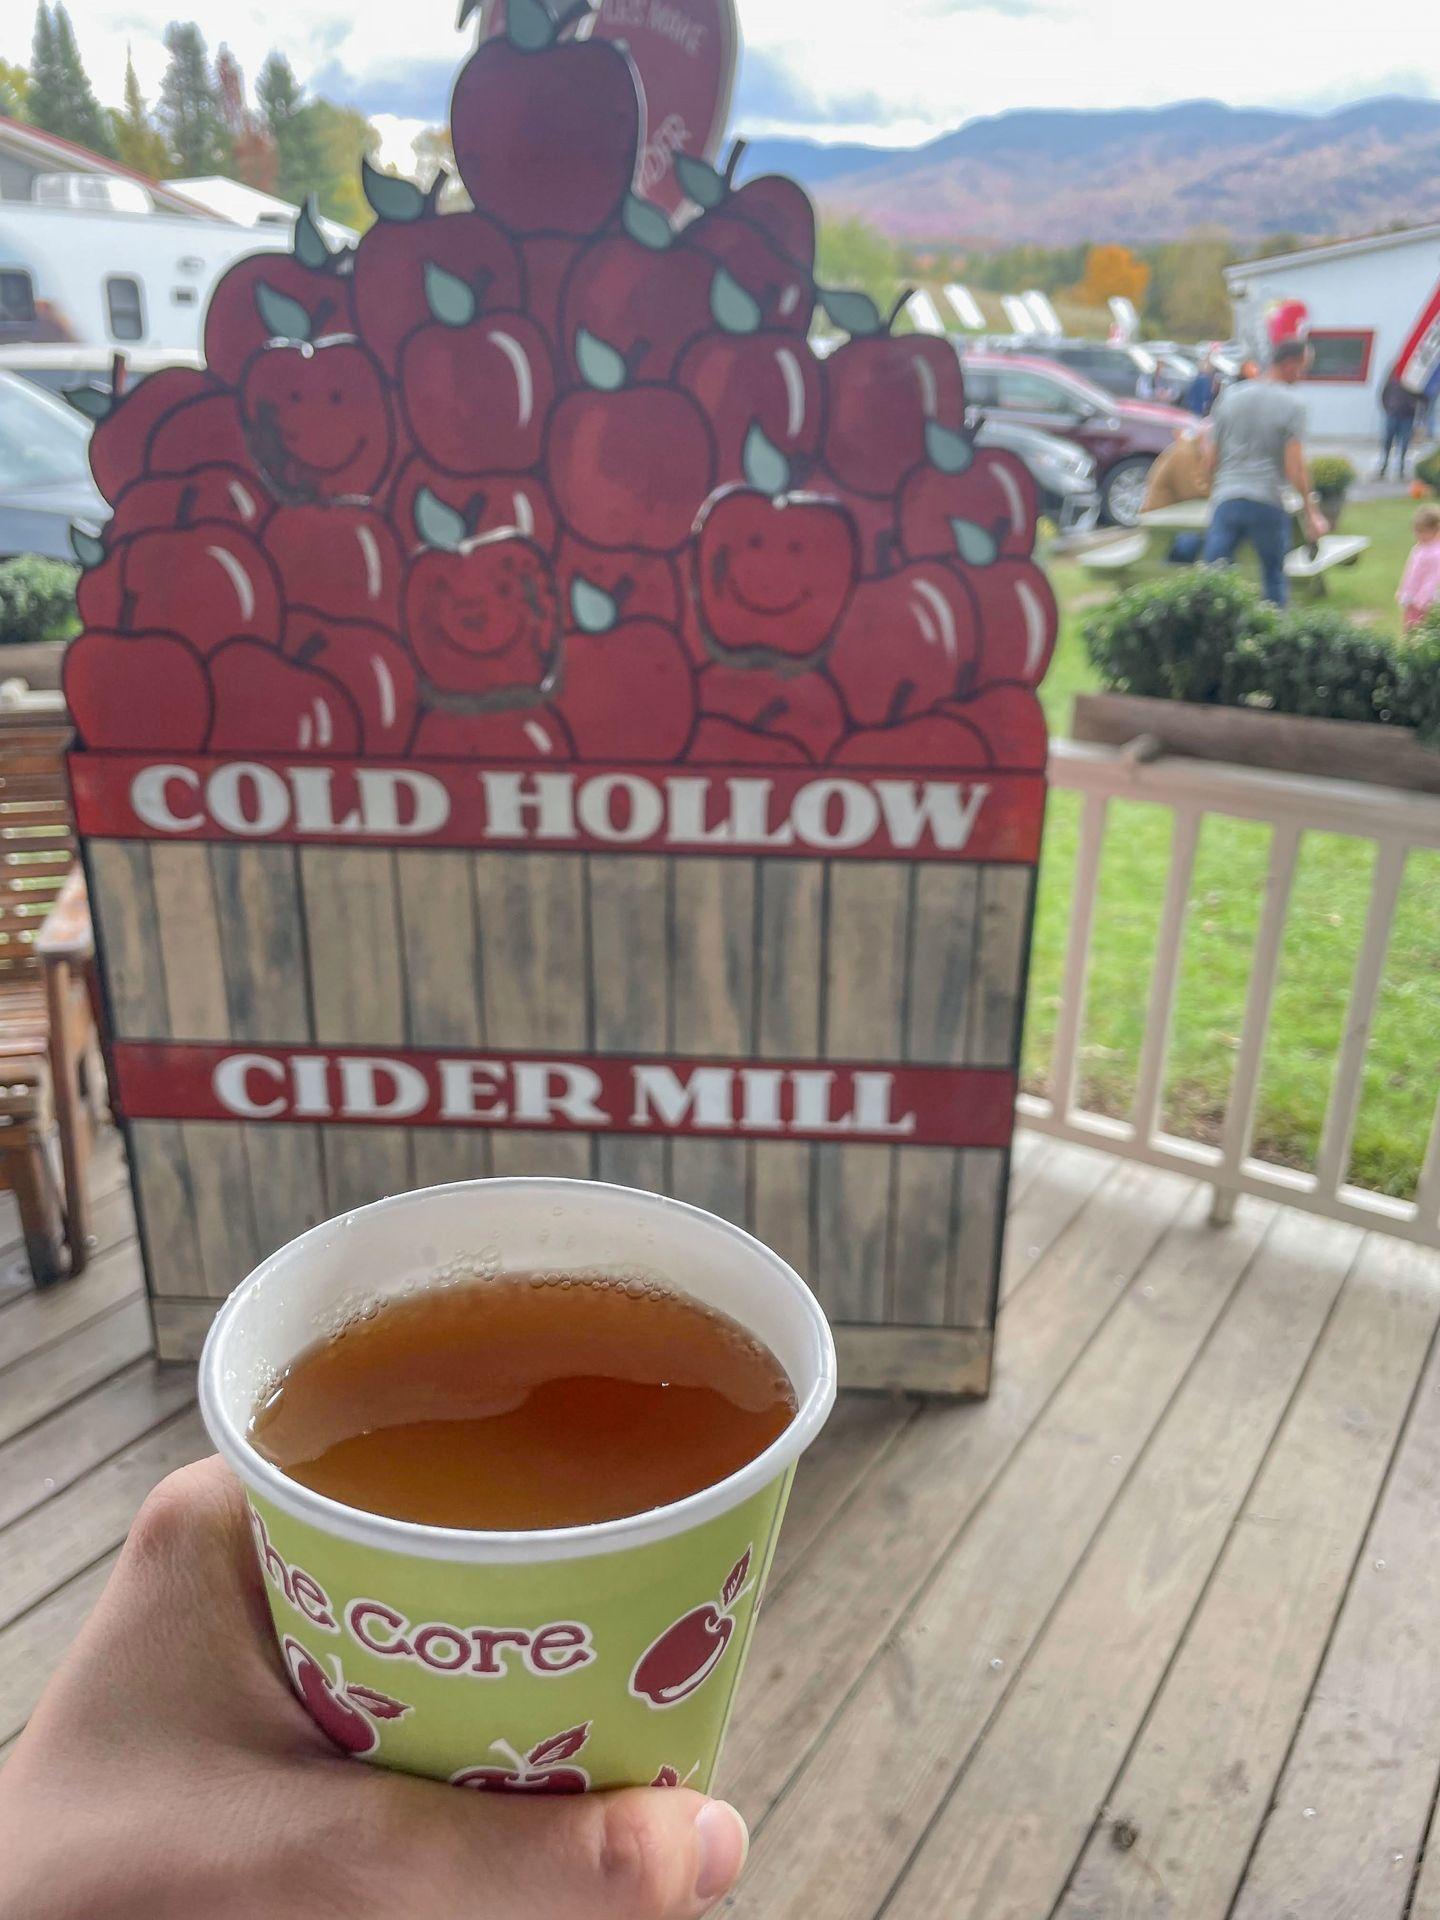 Holding a cup of hot apple cider in front of a wooden sign that reads 'Cold Hollow Cider Mill'